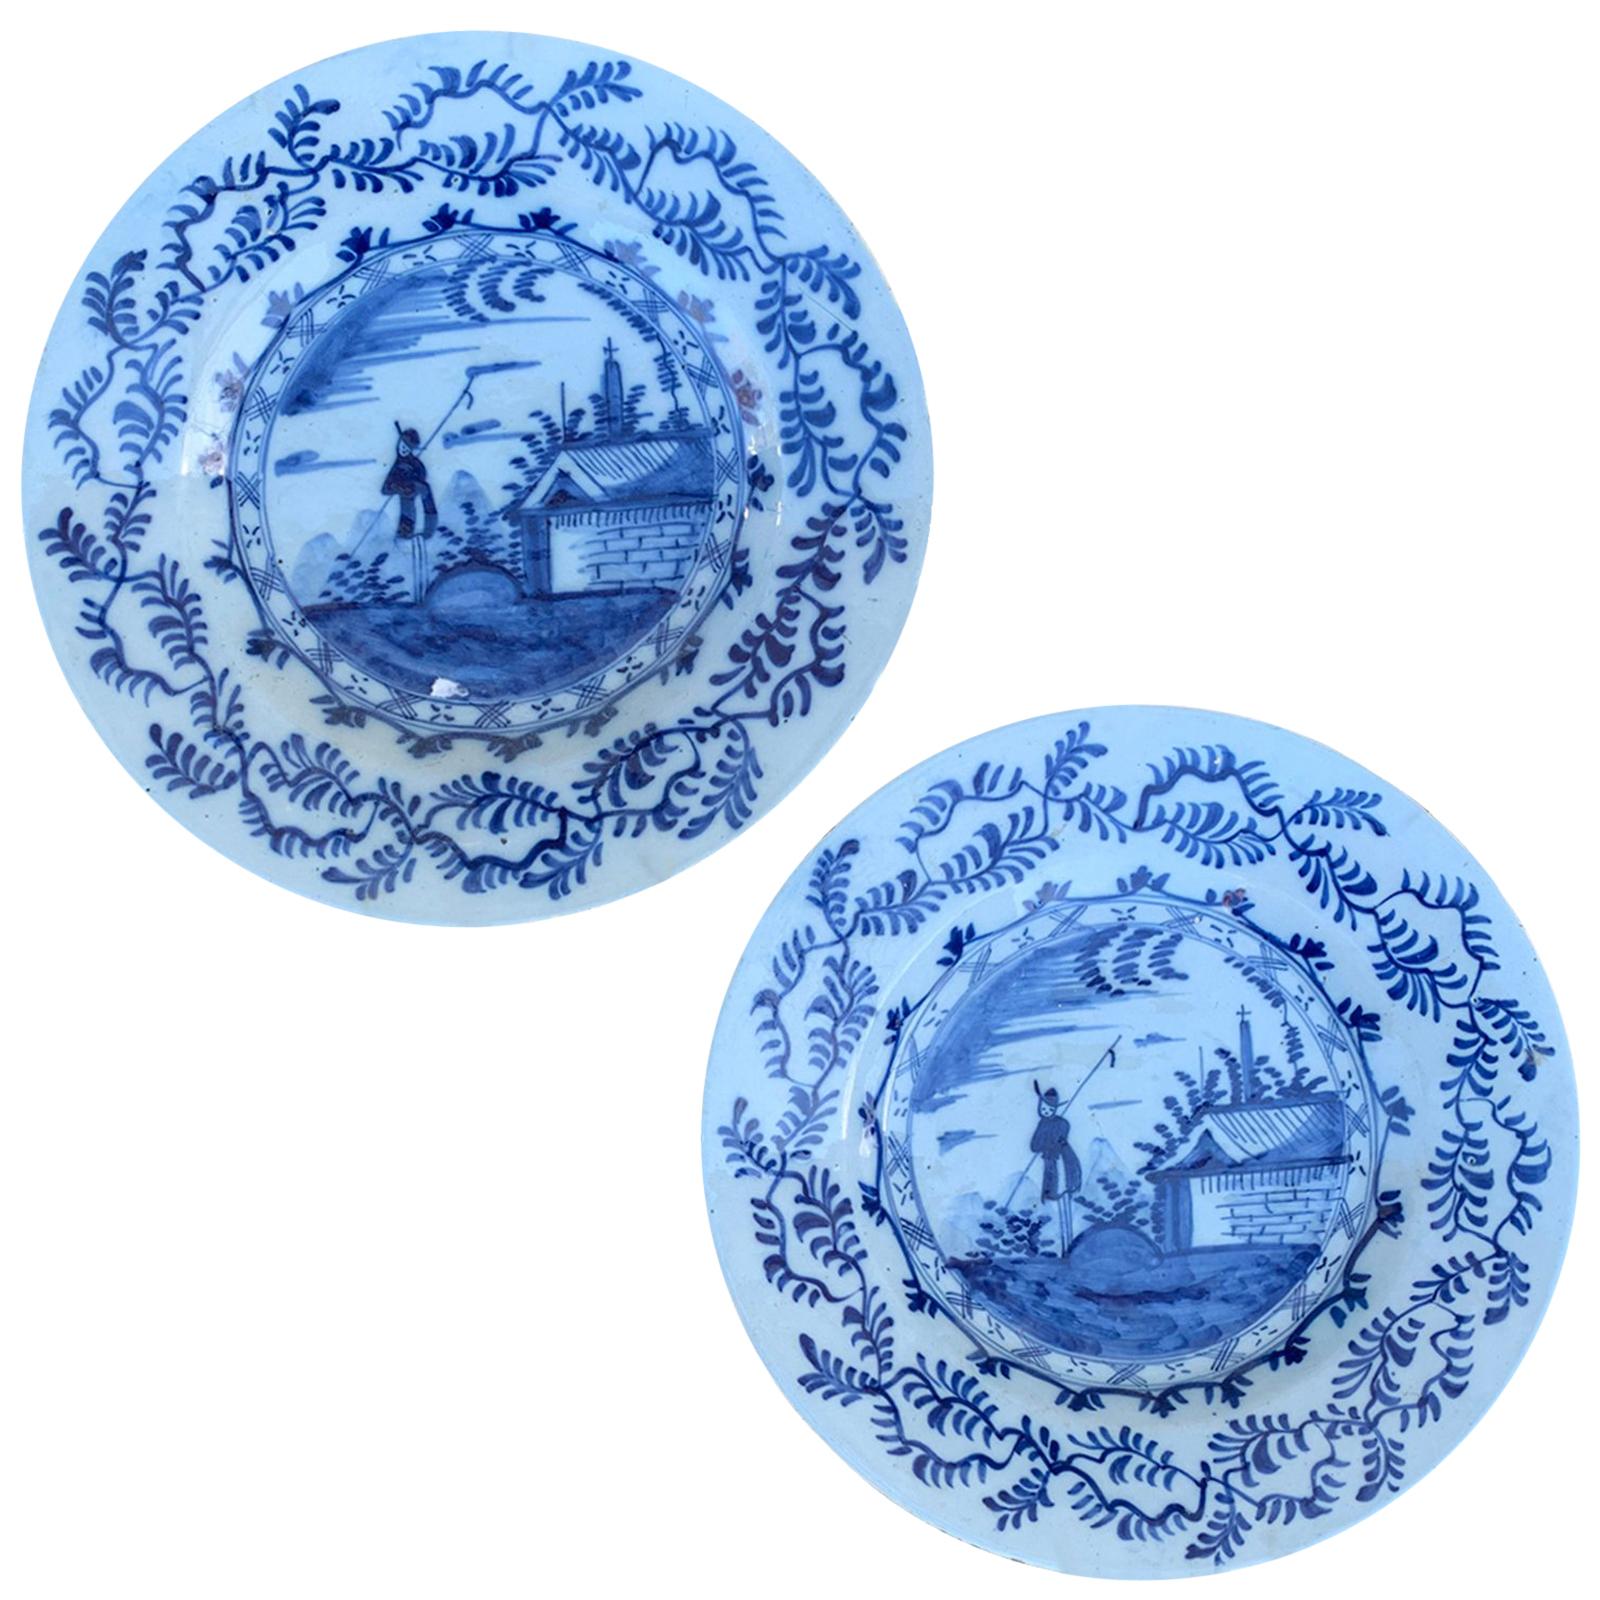 Pair of 18th Century Delft Style Blue & White Plates with Fisherman